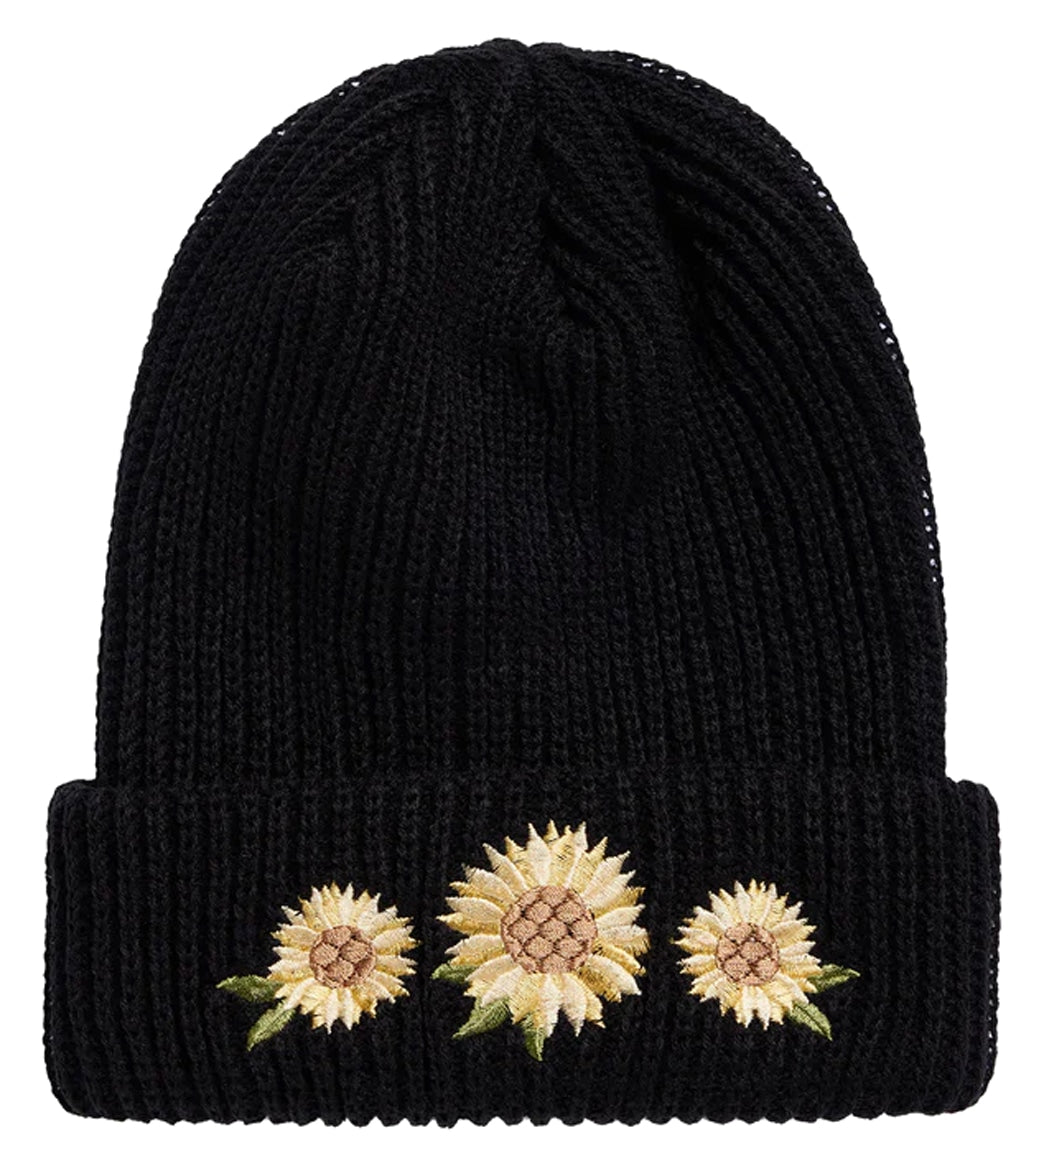 O'Neill Women's Groceries Embroidery Beanie at